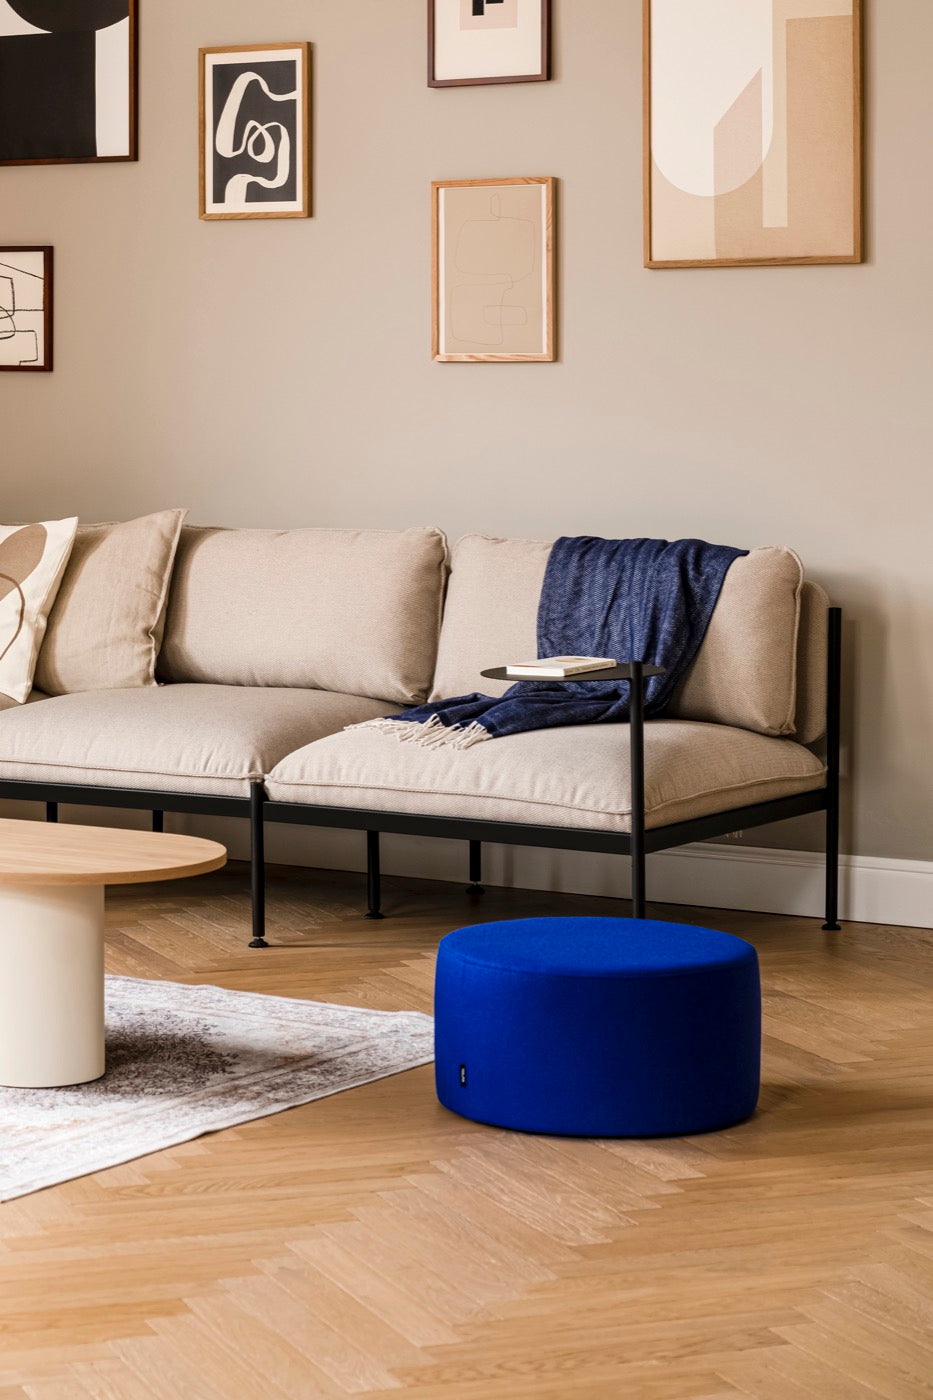 Step into comfort and explore living room ideas for small, cozy, and aesthetic spaces. Discover modern designs including coffee tables, poufs, stools, side tables, sofas, armchairs, ottomans, TV stands, sideboards, and more. Colorful, japandi, or minimal.